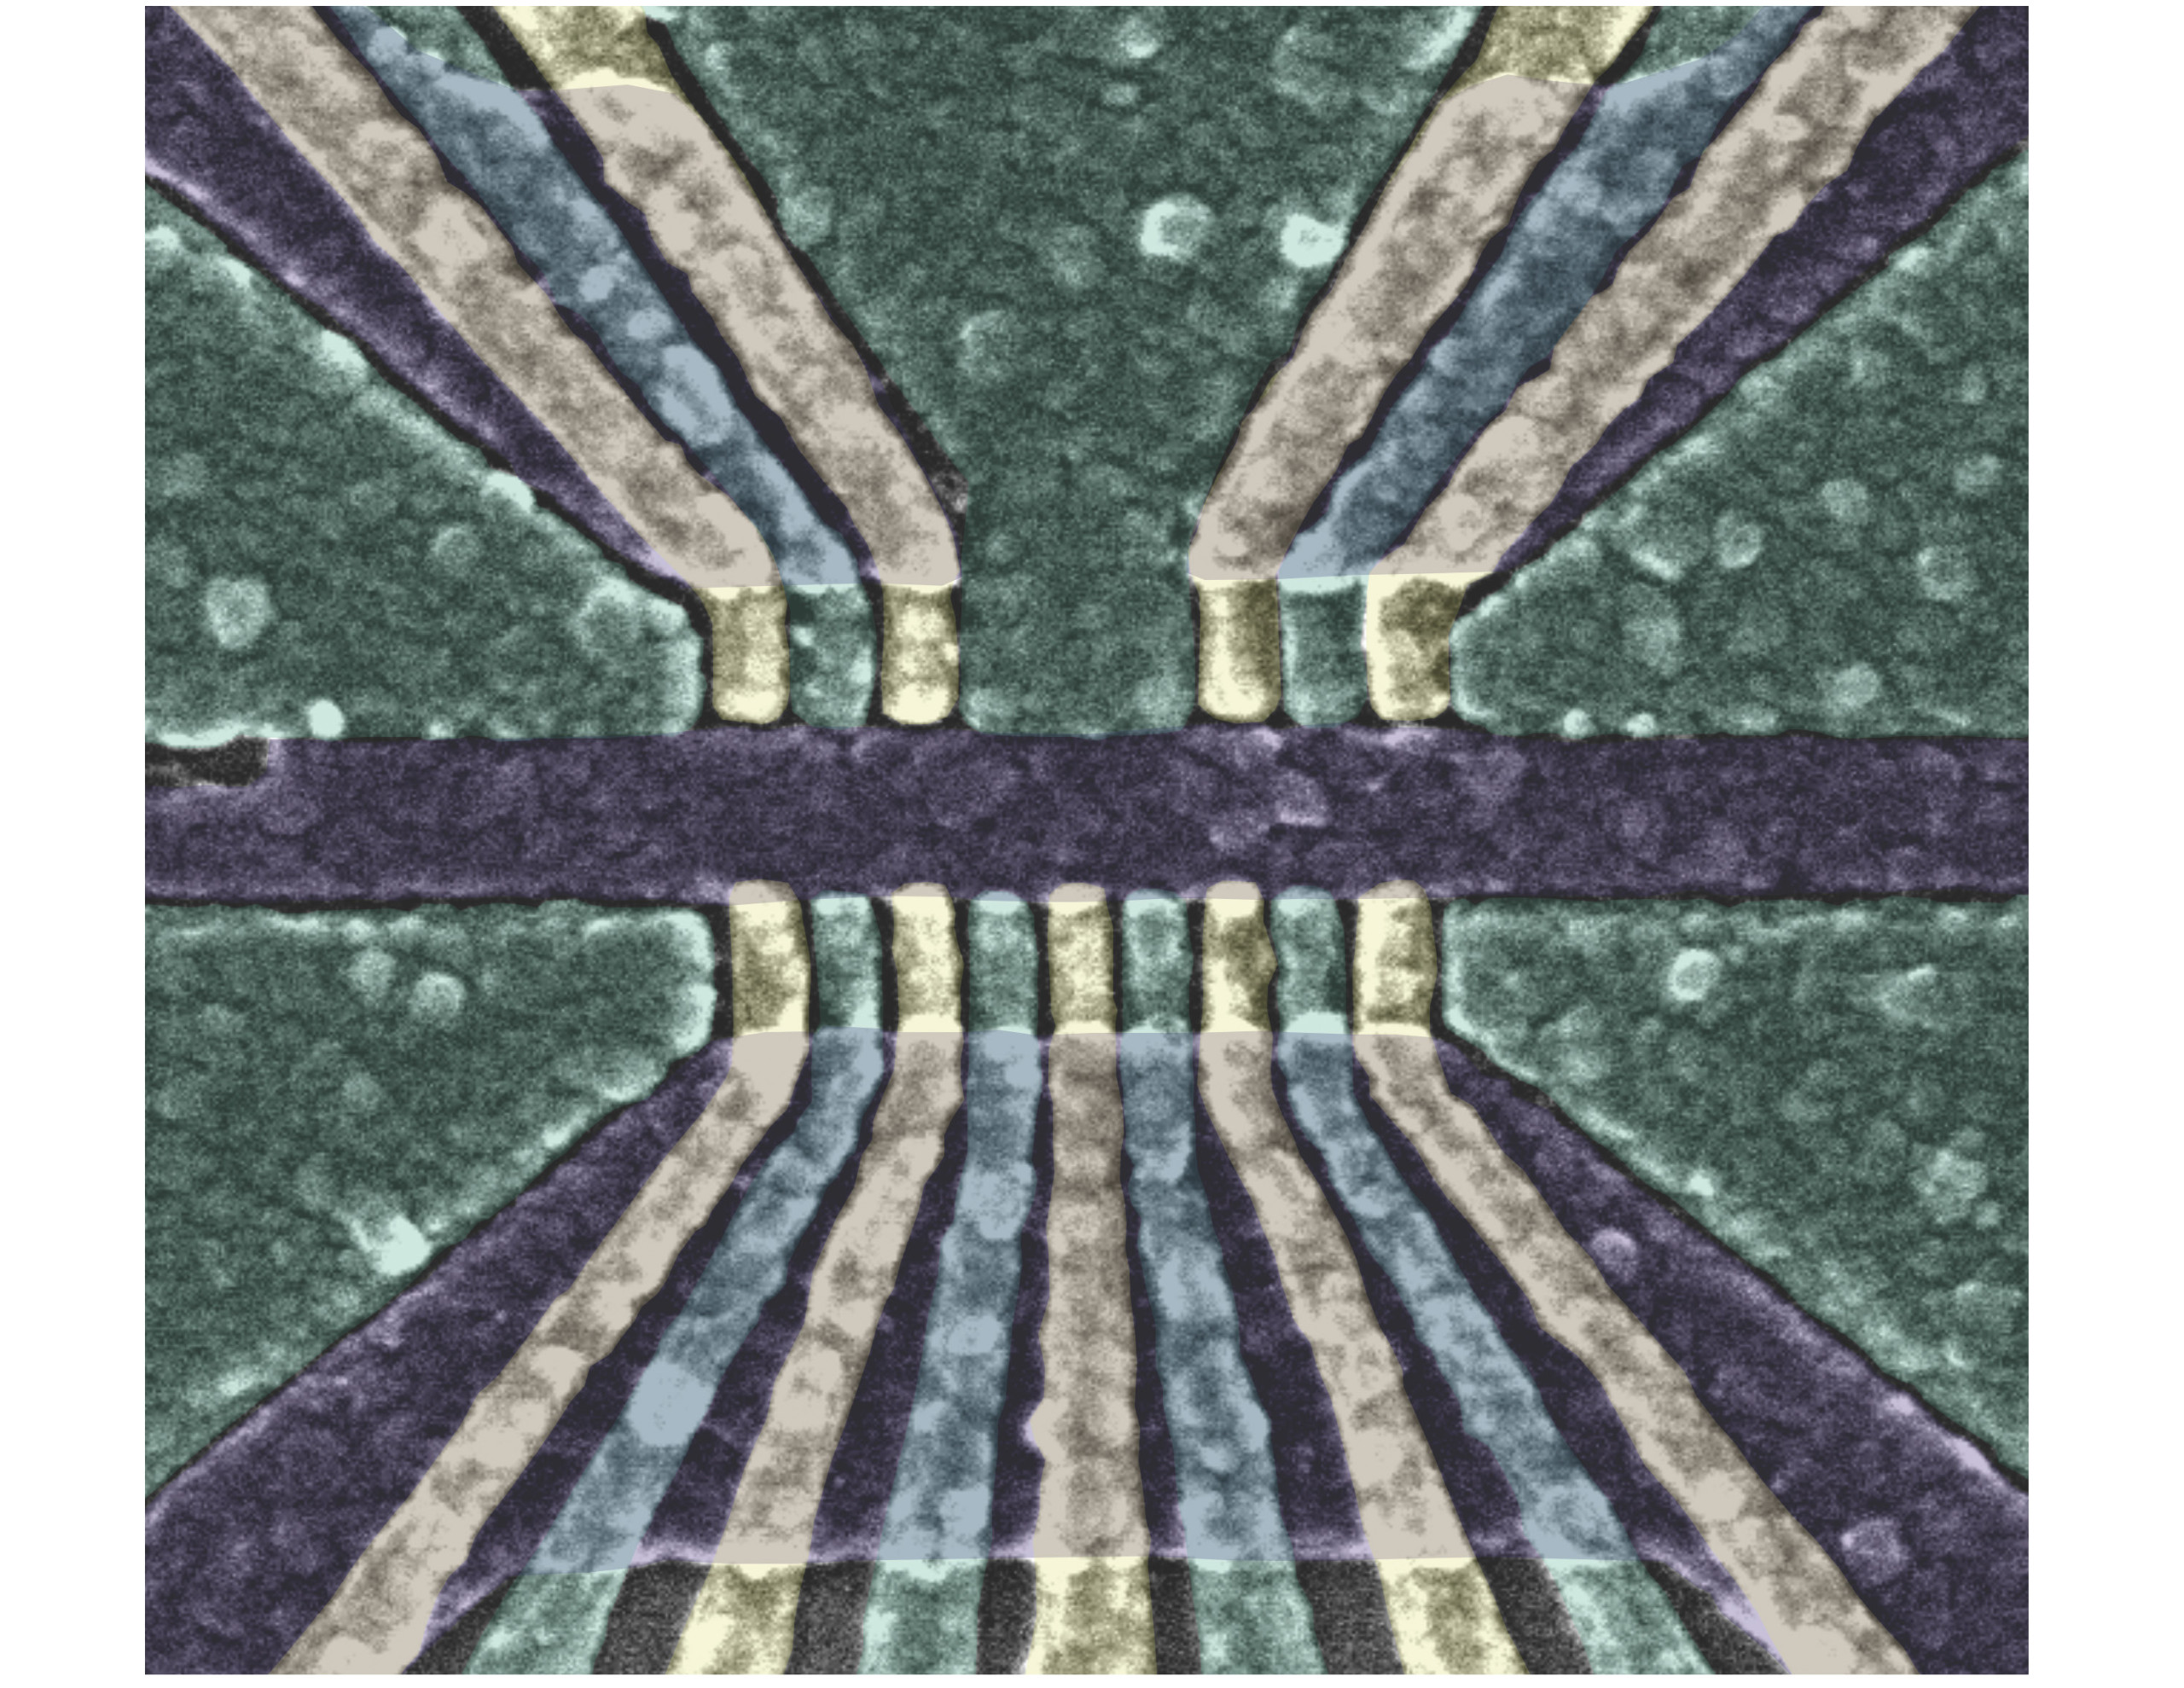 A false-colored scanning electron micrograph of the qubit structure used in this study. The imaged area is about 1,500 nanometers across. For comparison, a human hair is between 50,000 and 100,000 nanometers wide.